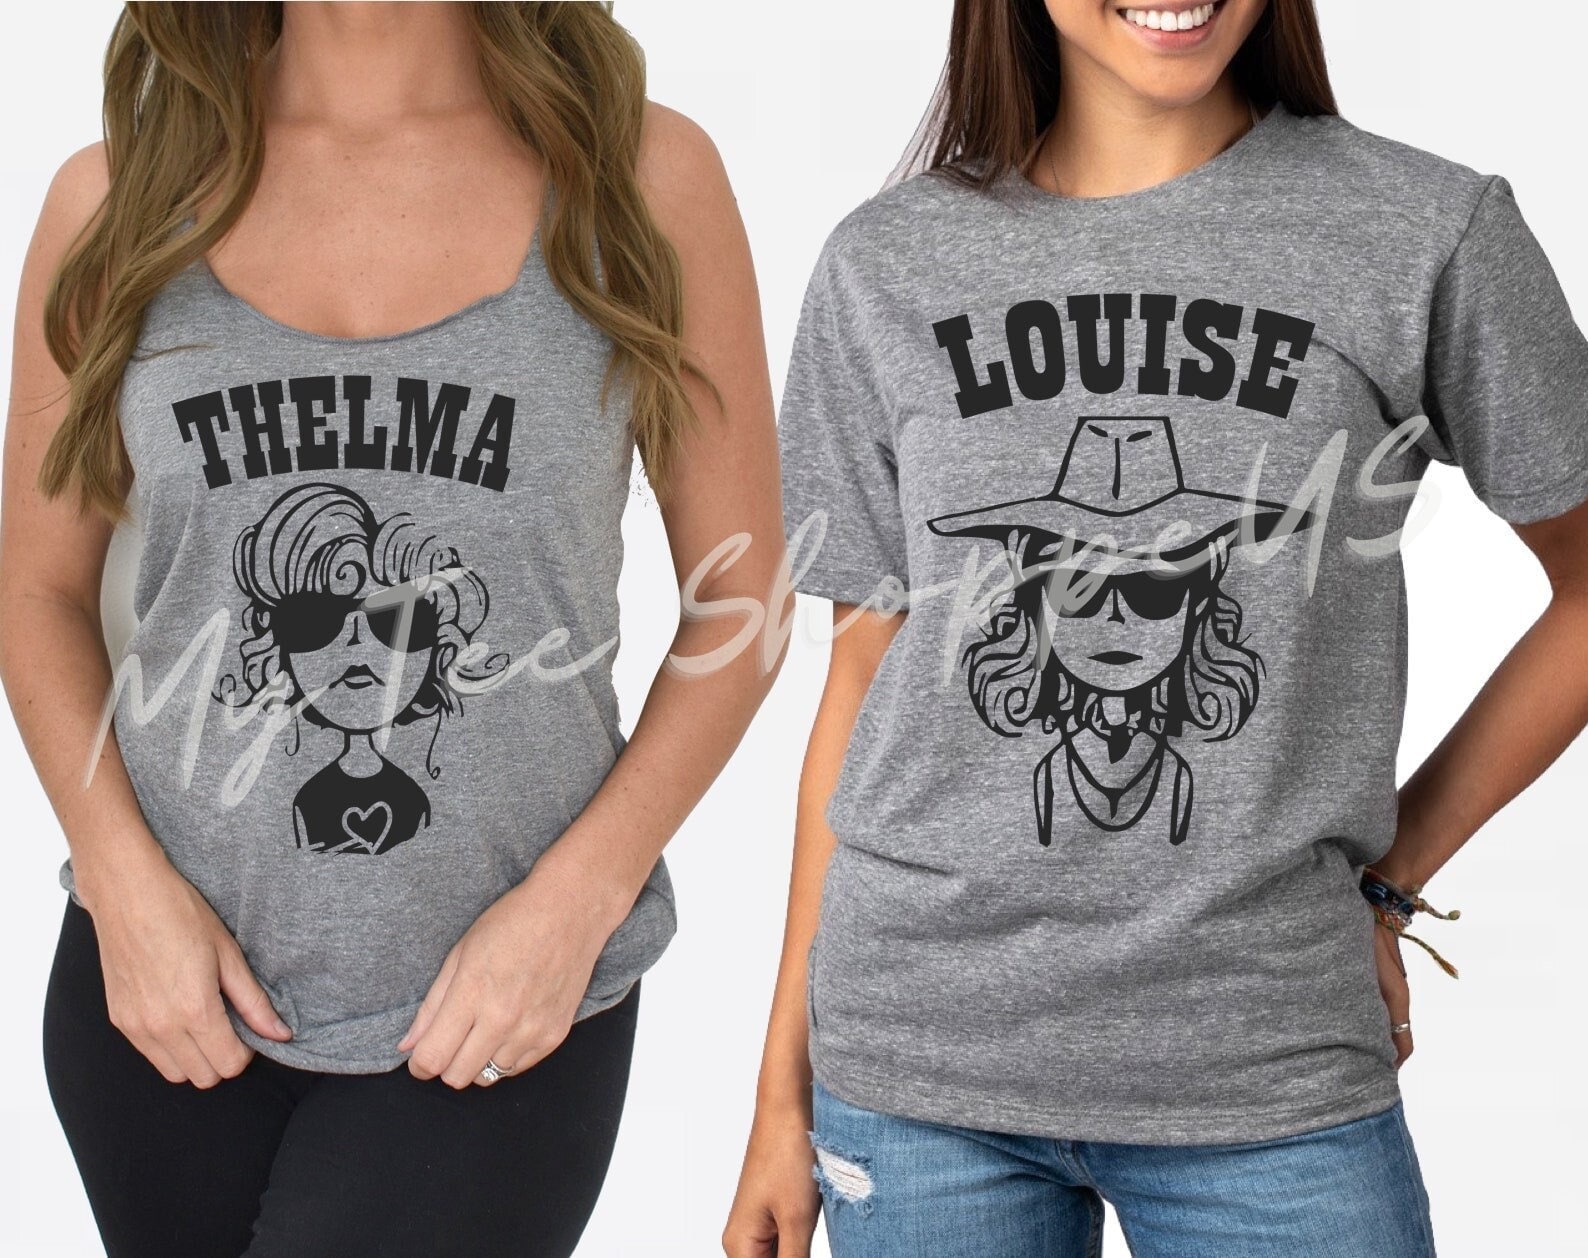 BeforeTheIDos Best Friend Themed Thelma or Louise Tee